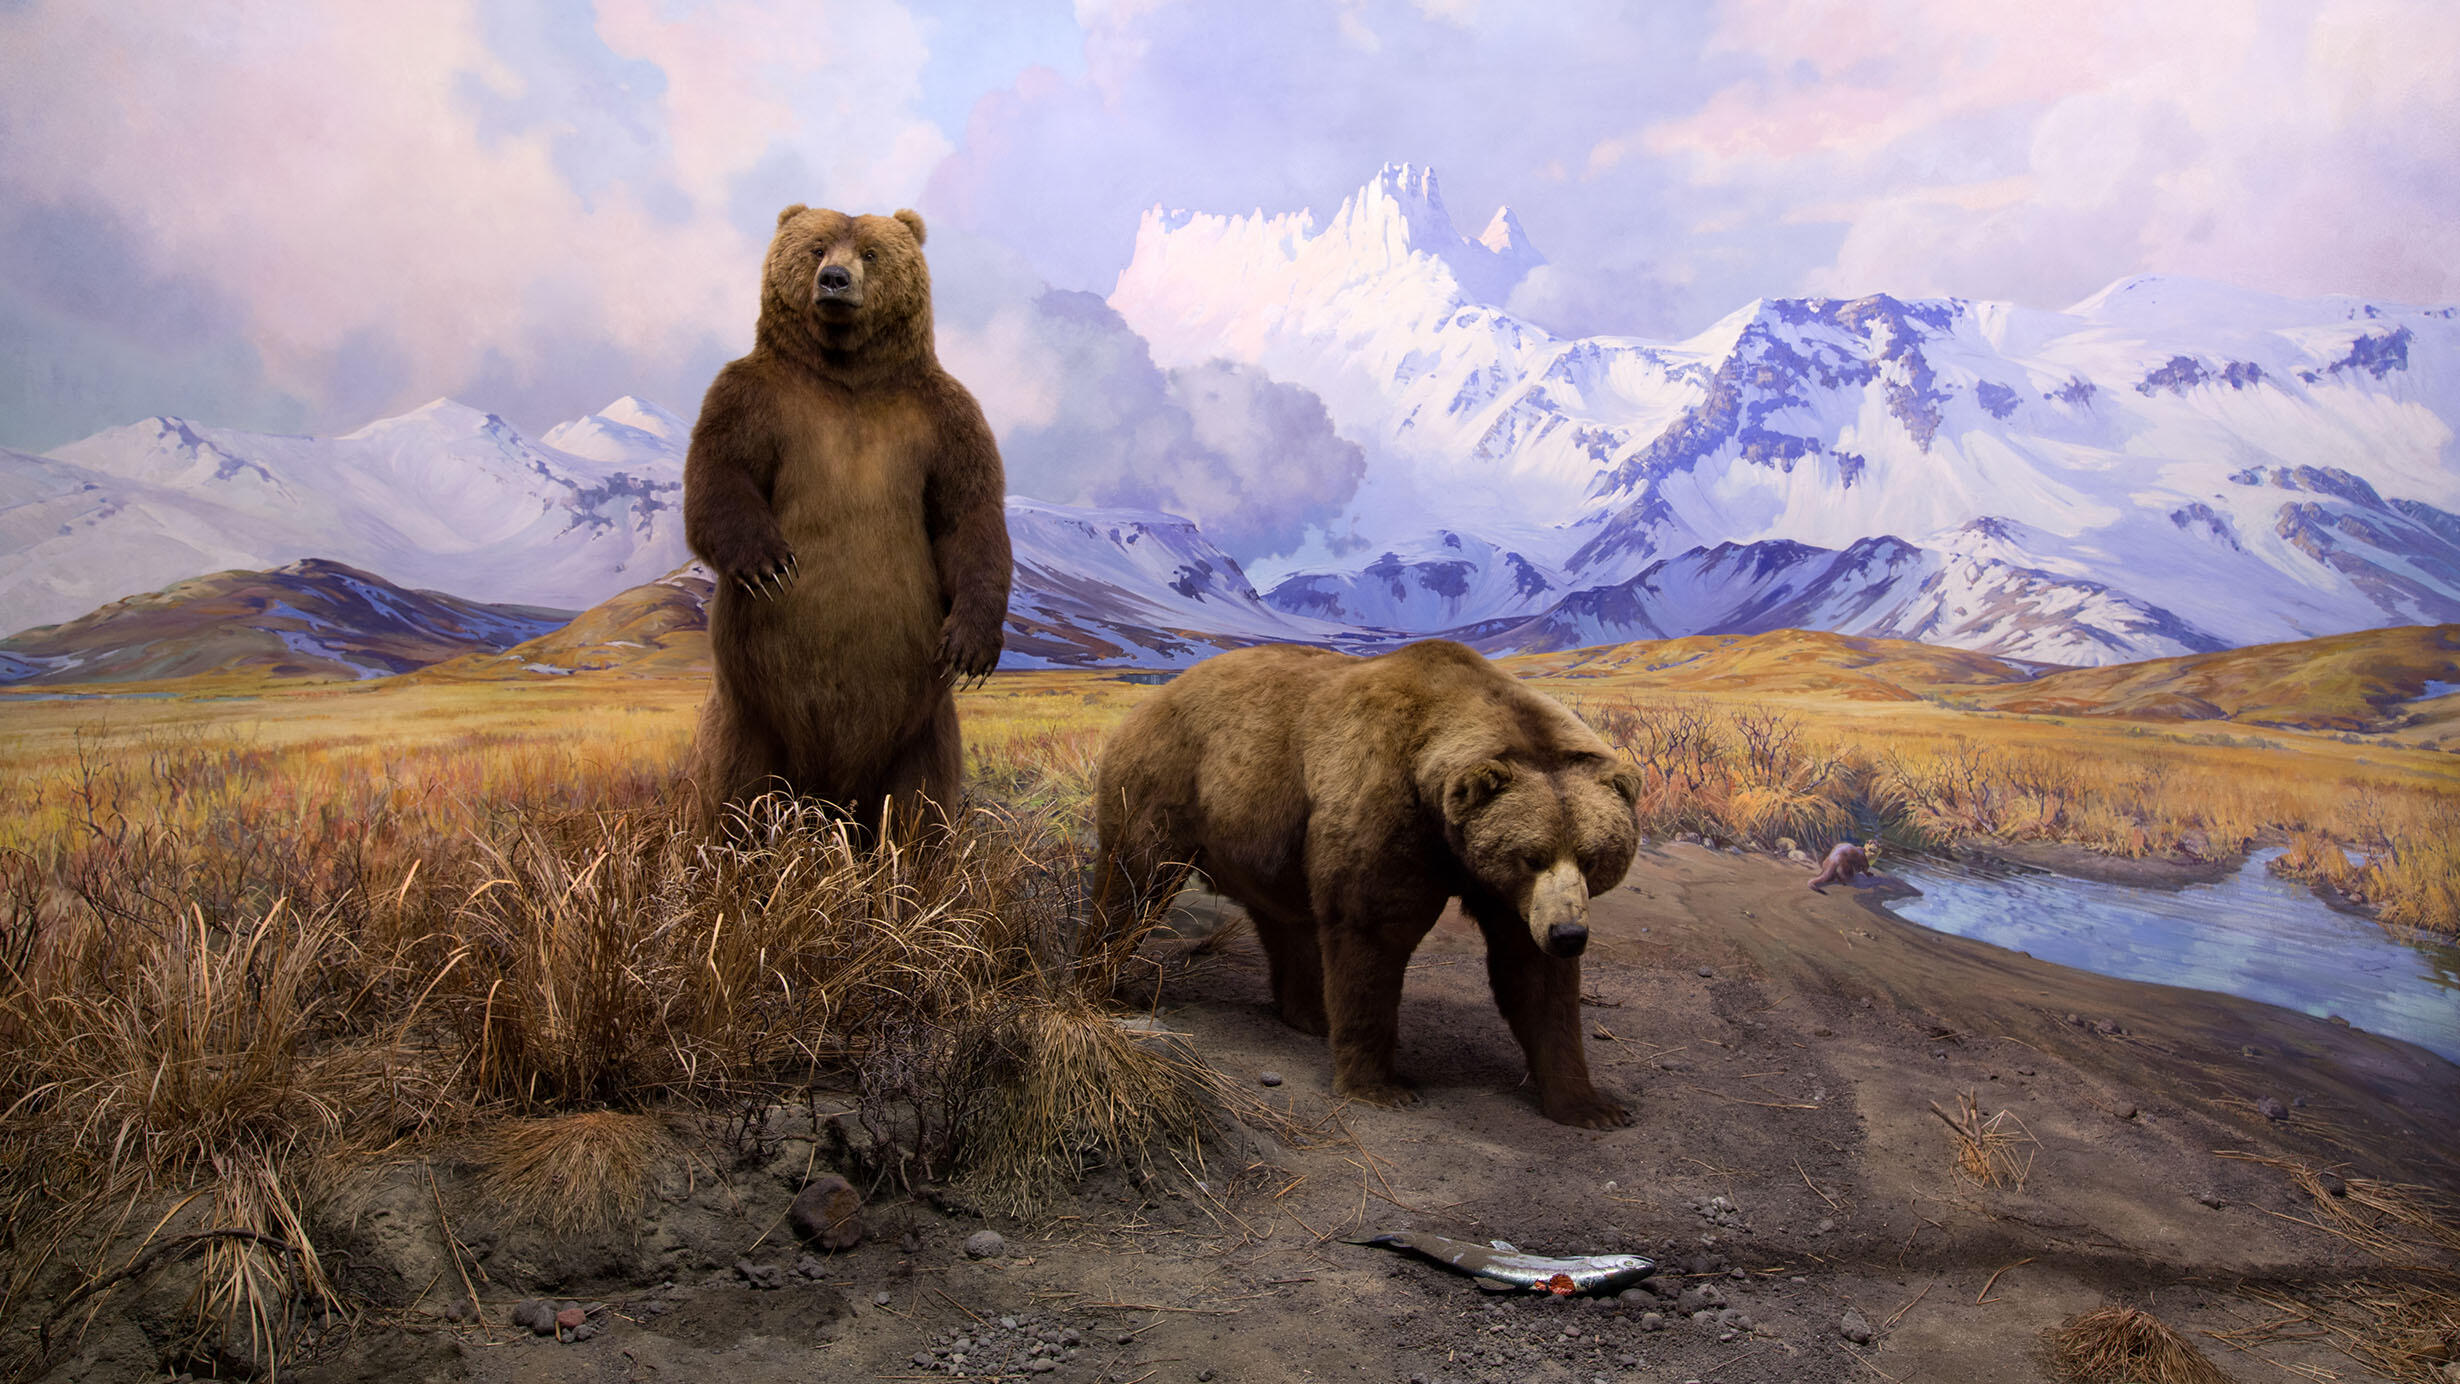 Museum diorama depicts two Alaska Brown Bears in front of a painted mountain backdrop.